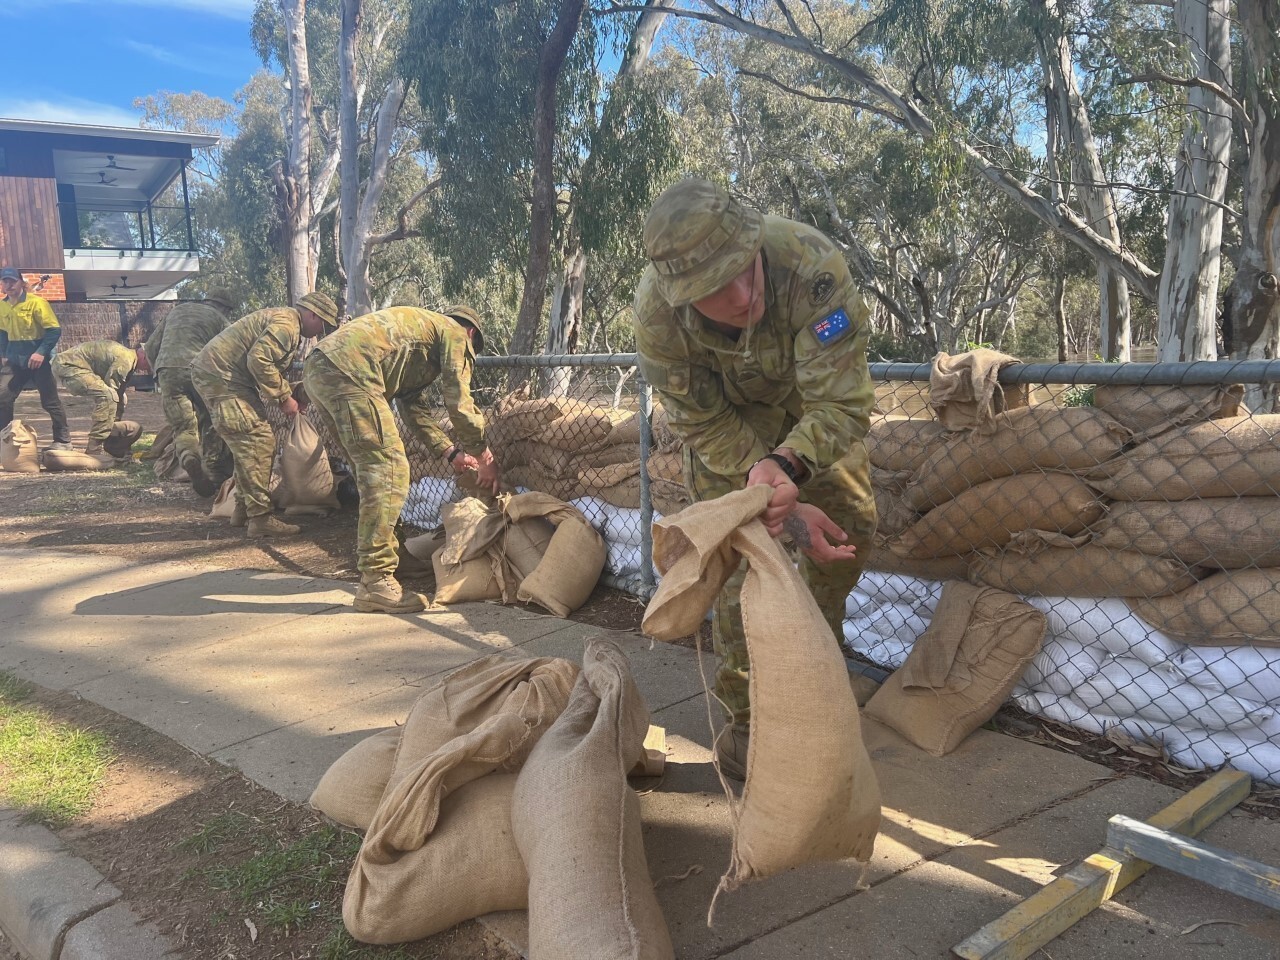 Military personnel place sandbags in a levee